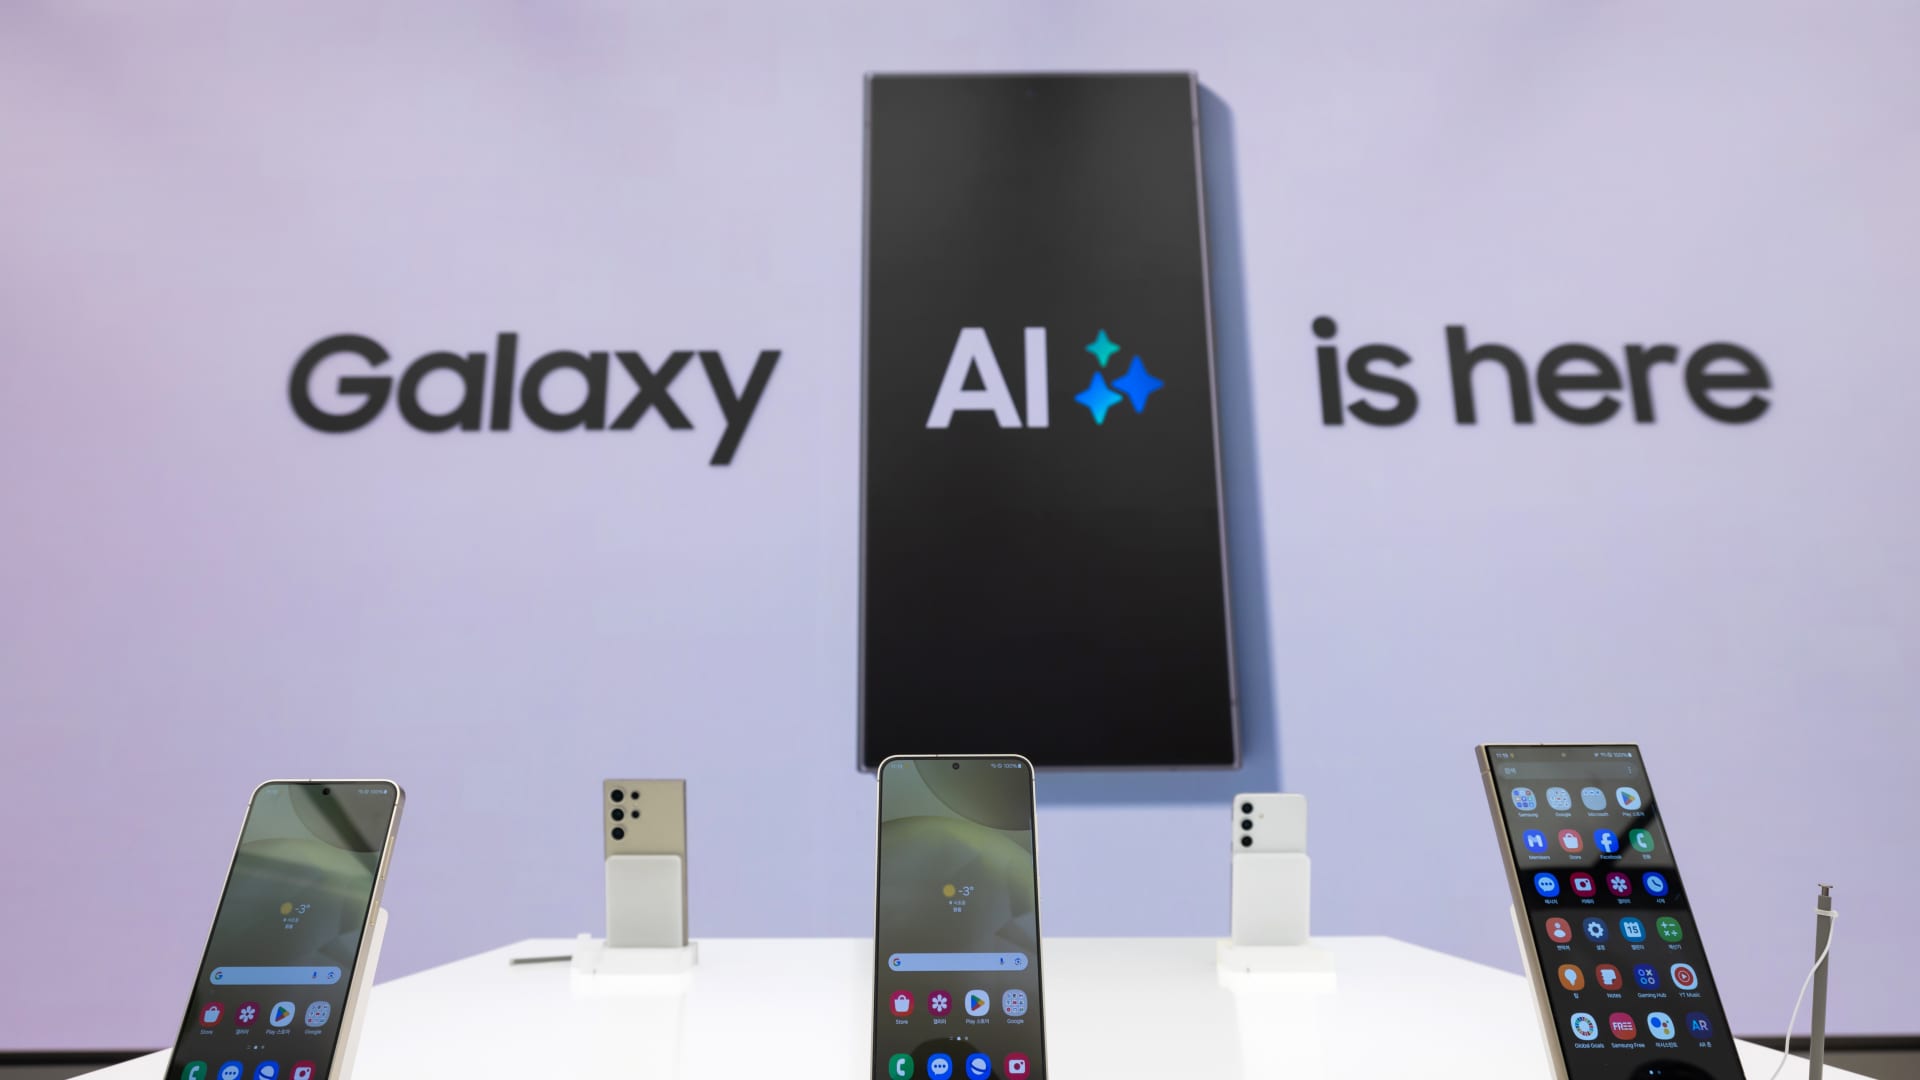 Smartphone giants like Samsung are going to talk up 'AI phones' this year â here's what that means